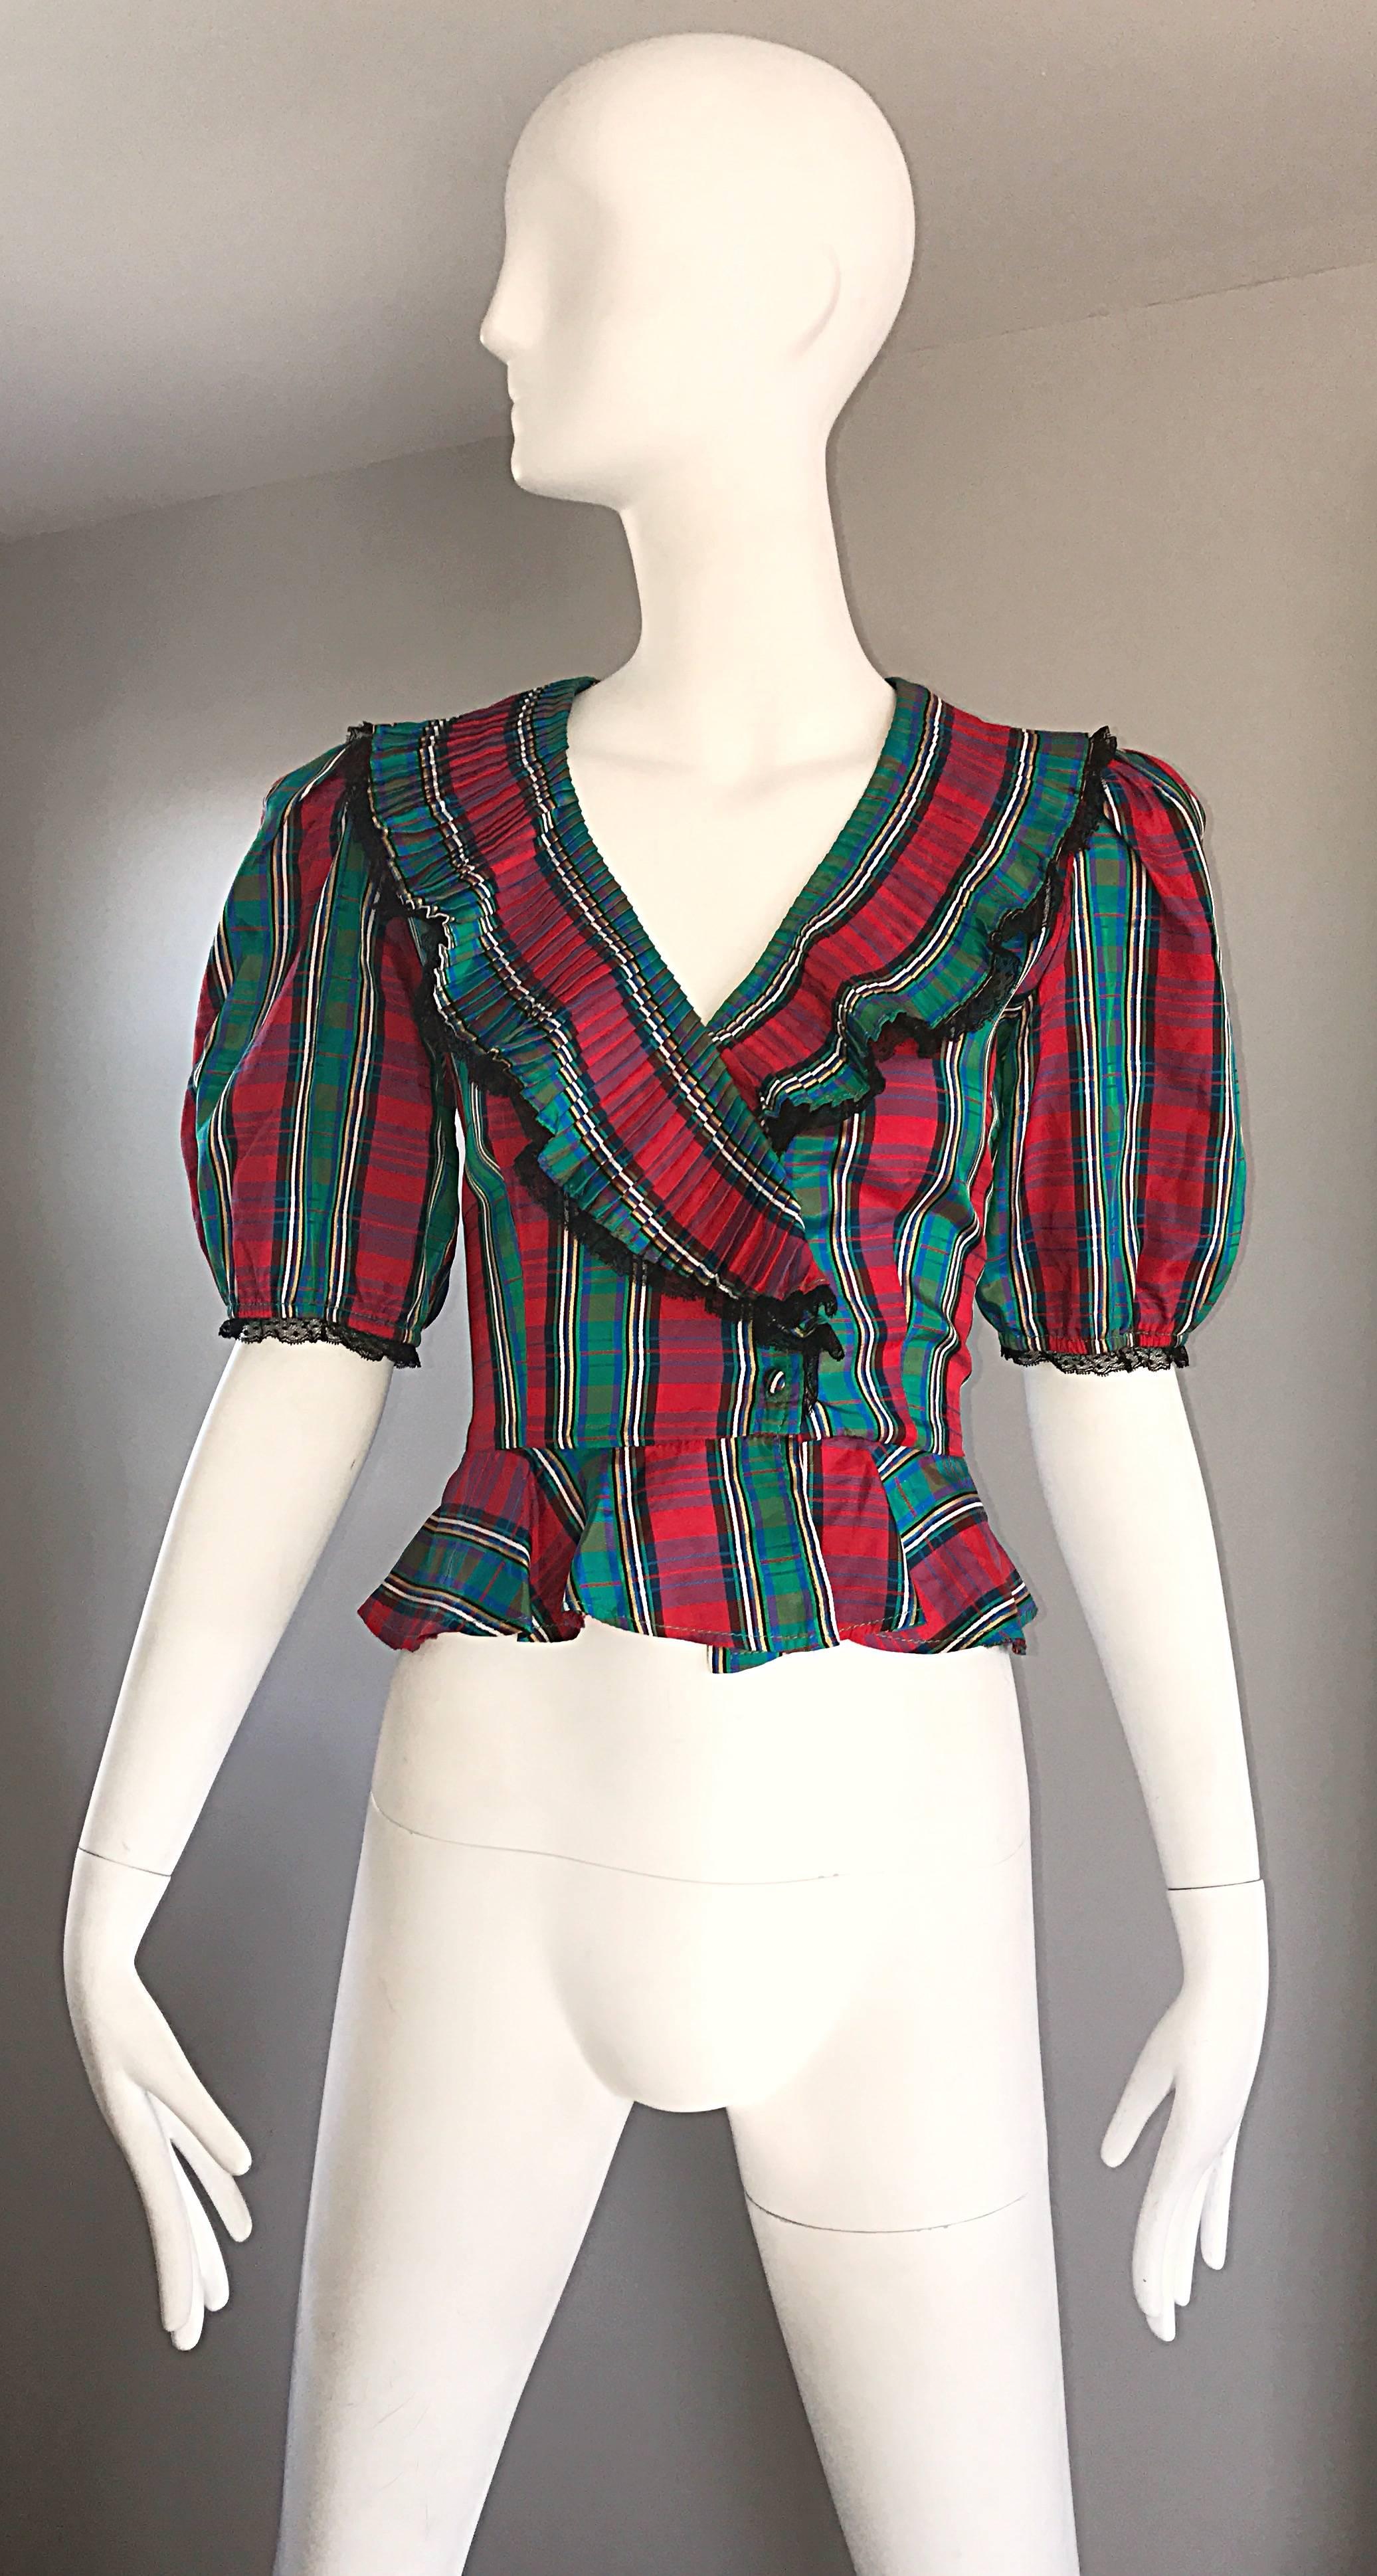 Chic late 70s red and green tartan plaid taffeta 'Victorian Revival' top! Features a fitted bodice, with a peplum waist. Accordion ruffled collar with black lace trim. Stylish full puff sleeves with matching black lace trim. Buttons up the bodice.